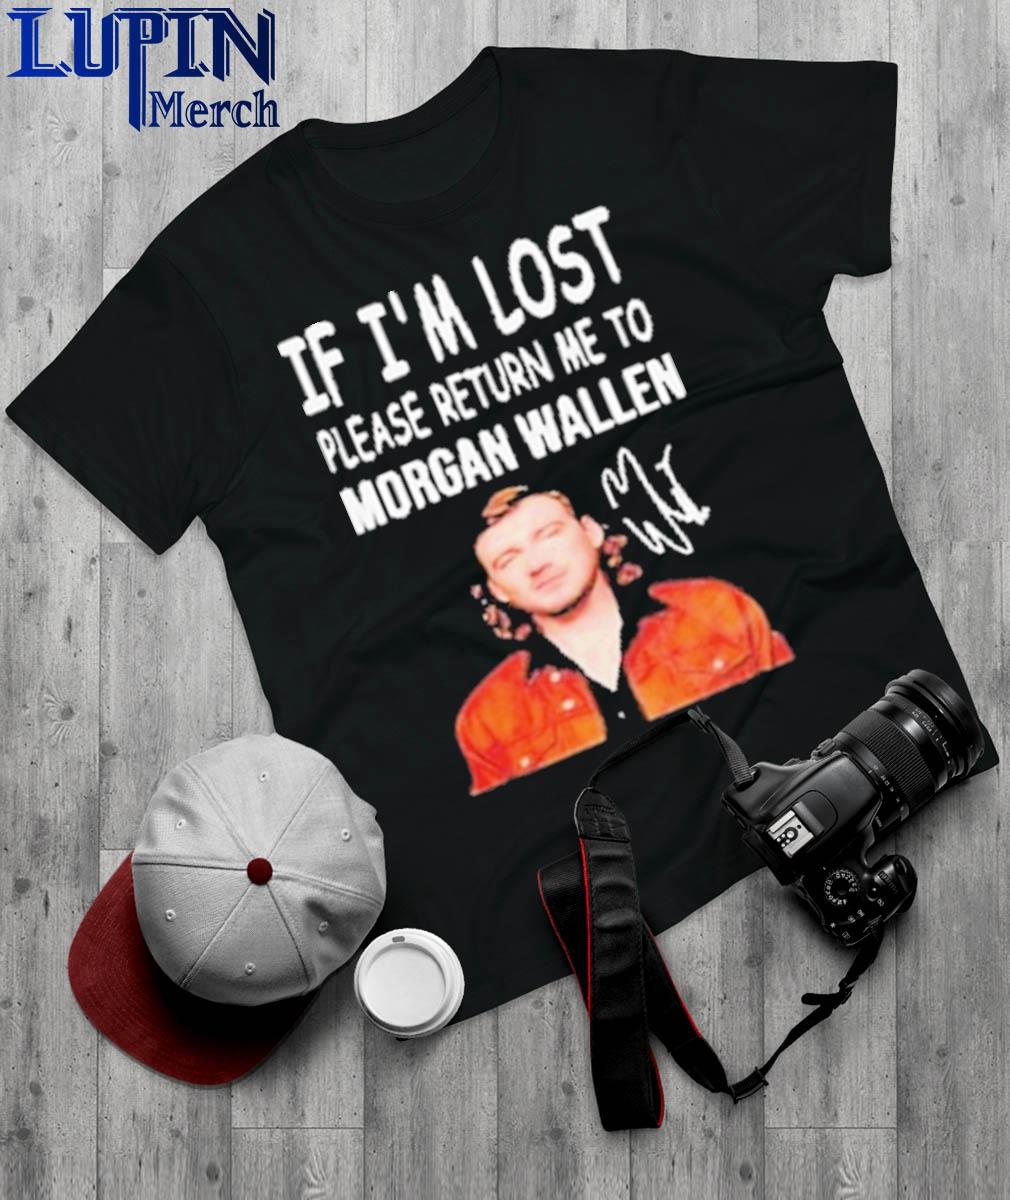 If I'm lost please return me to Morgan Wallen shirt, hoodie, sweater, long  sleeve and tank top